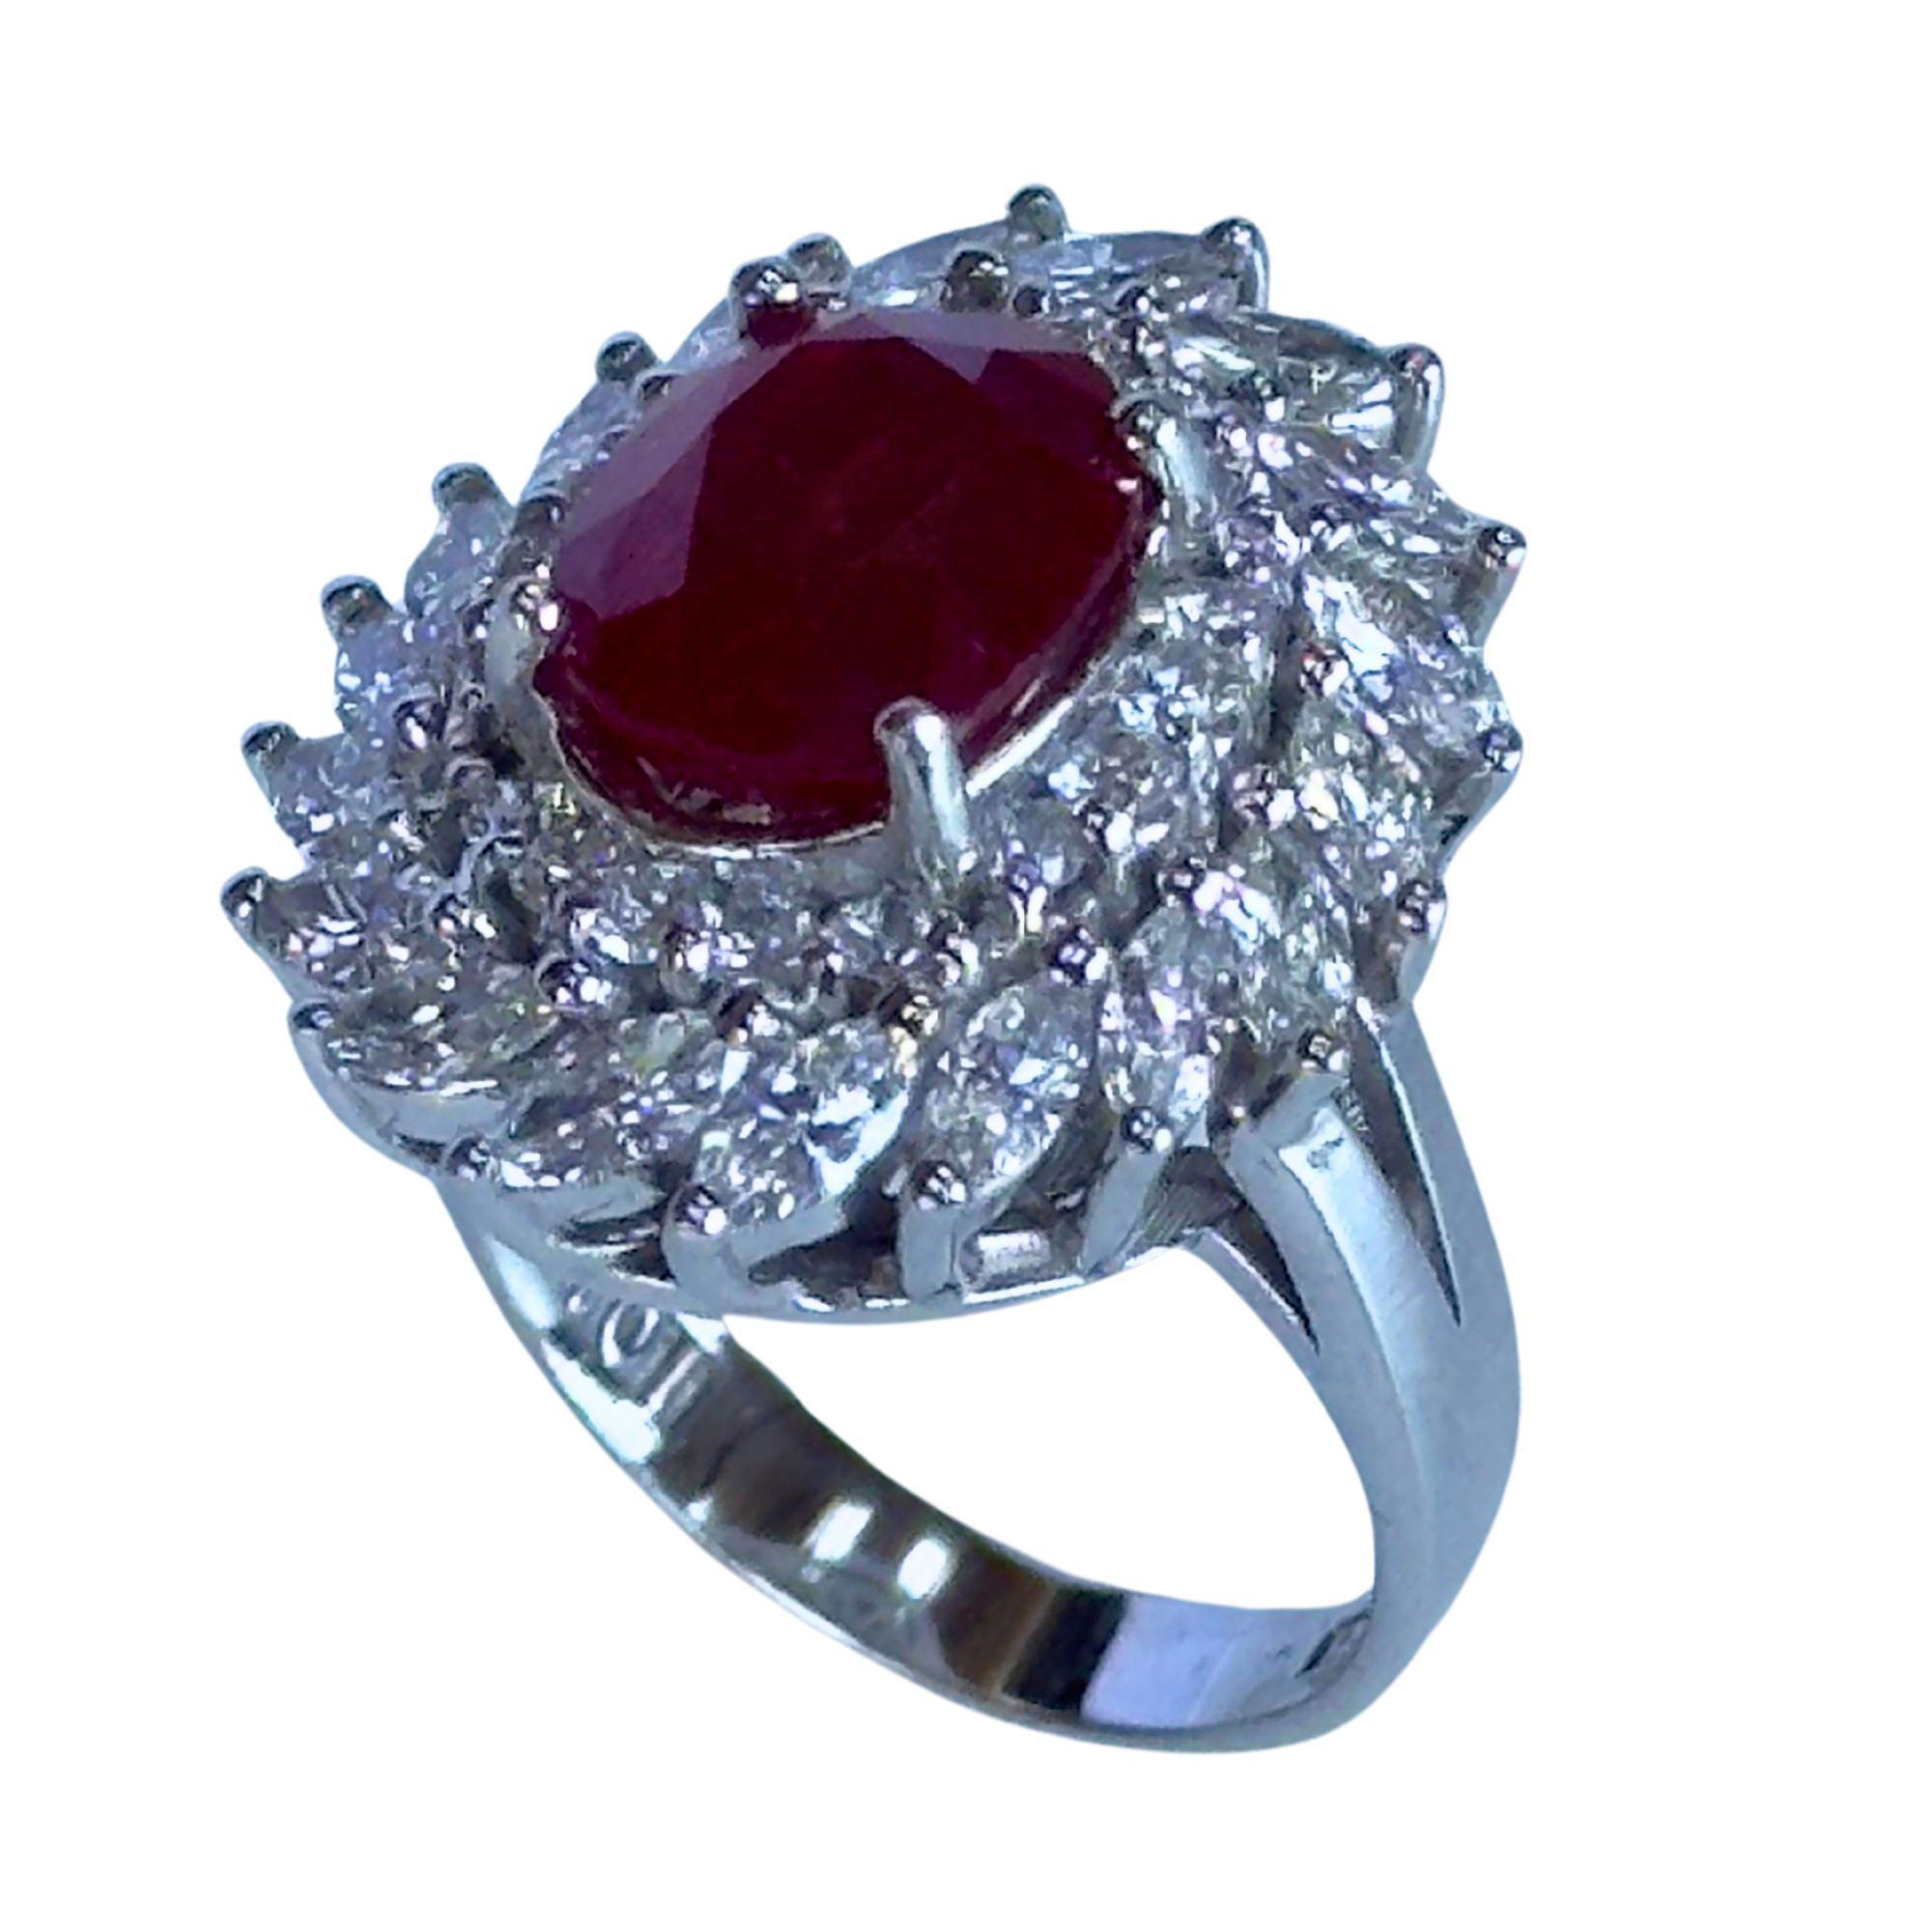 Indulge in luxury and sophistication with this 18k Diamond and Ruby Ring. Crafted with 18k white gold and marked with 